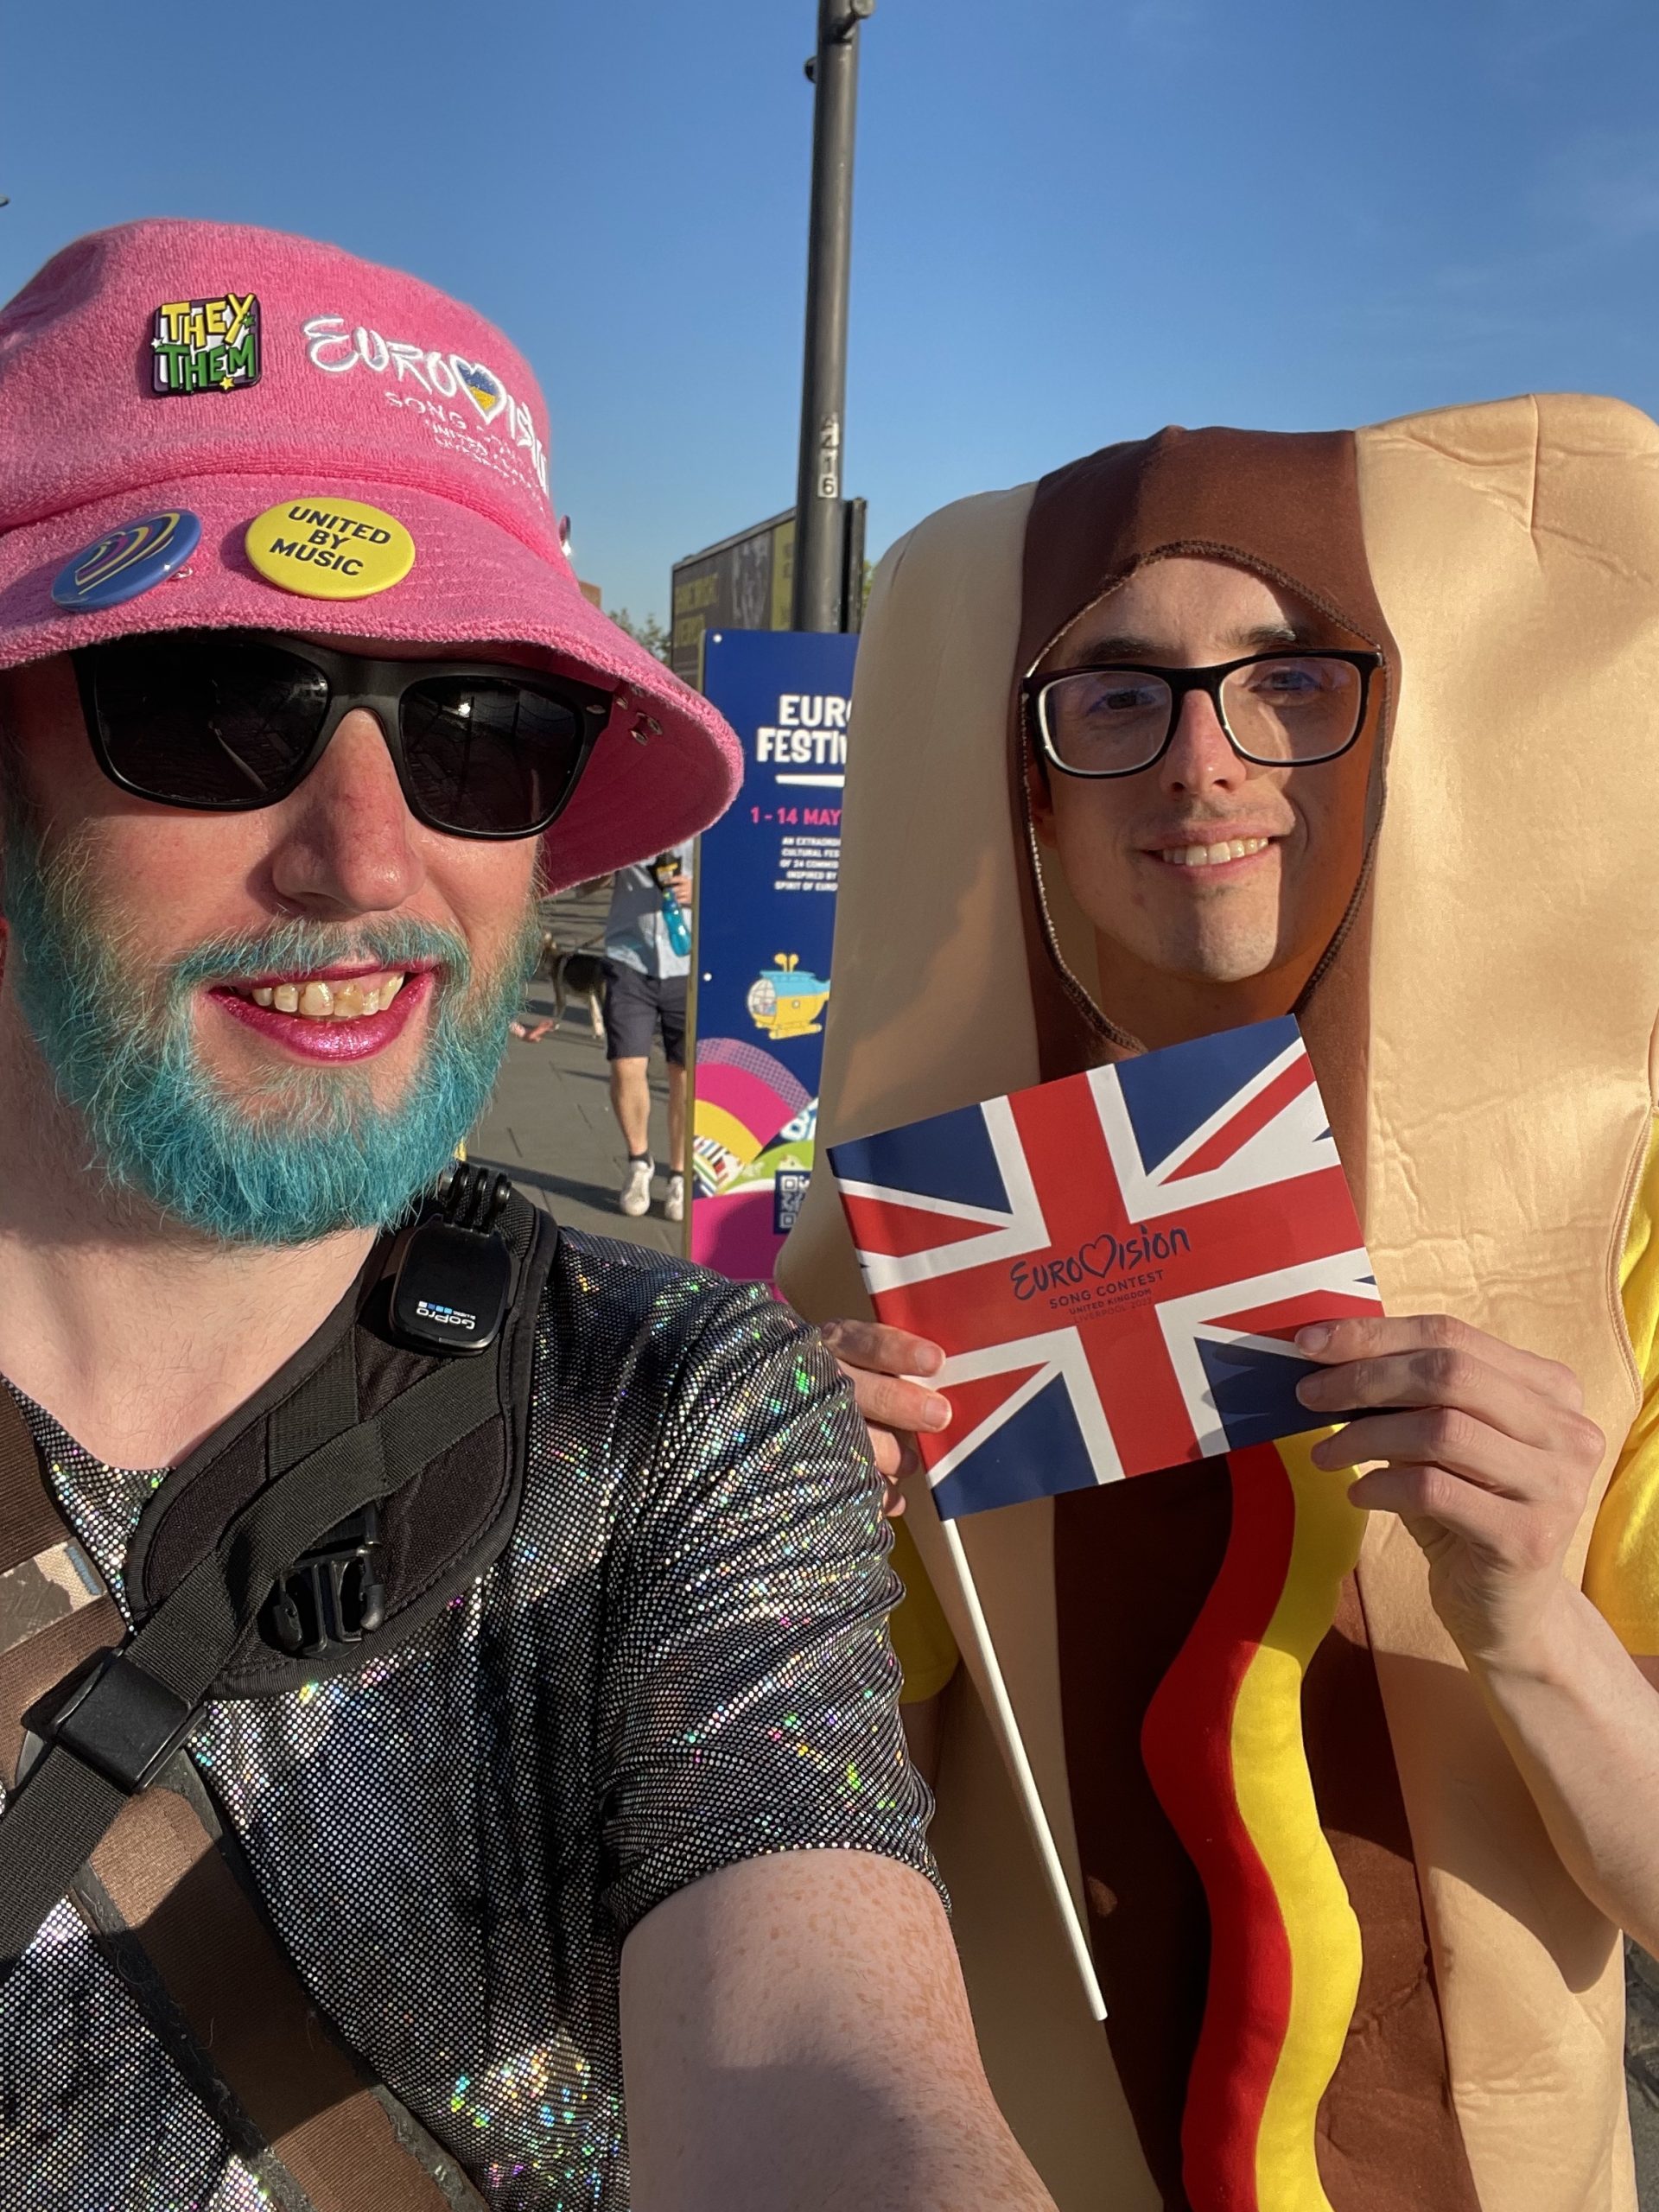 Non-binary person on the left in a sparkly dress, with blue beard and pink hat. Person dressed as hot dog with UK flag on the right. Both smiling to camera.